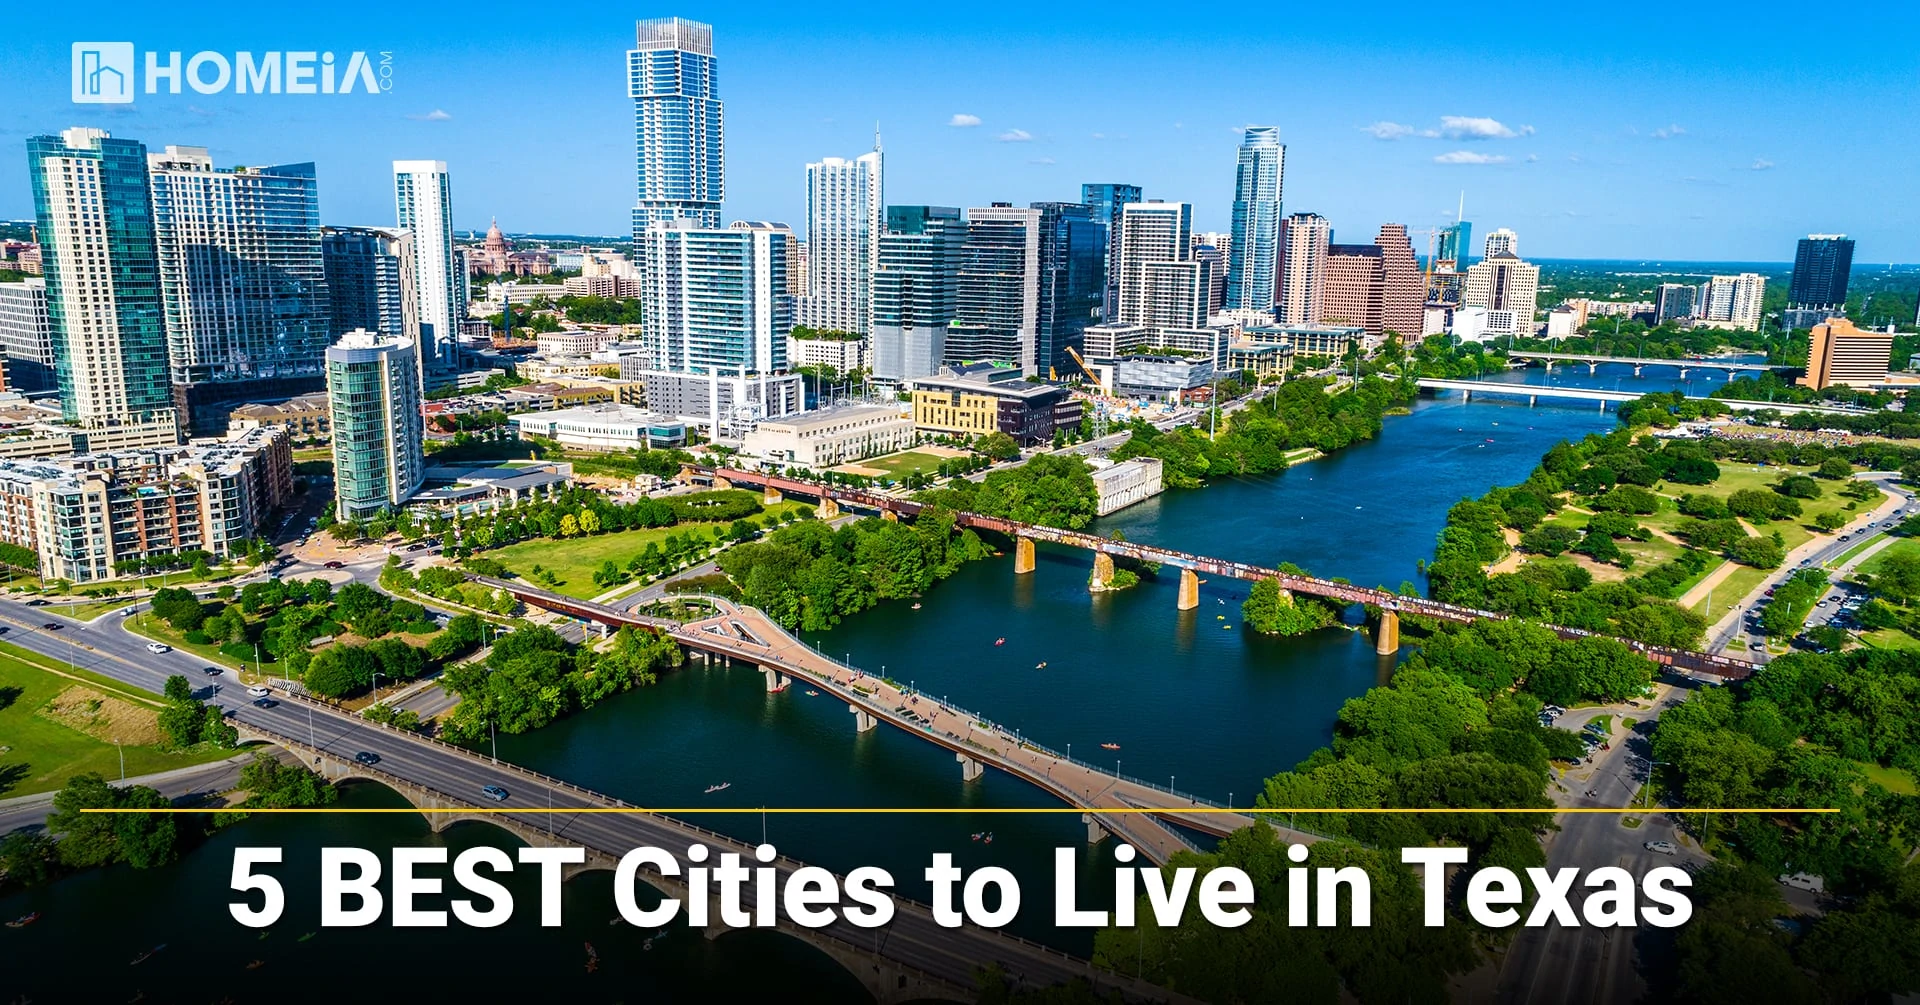 5 Best Places to Live in Texas 2021